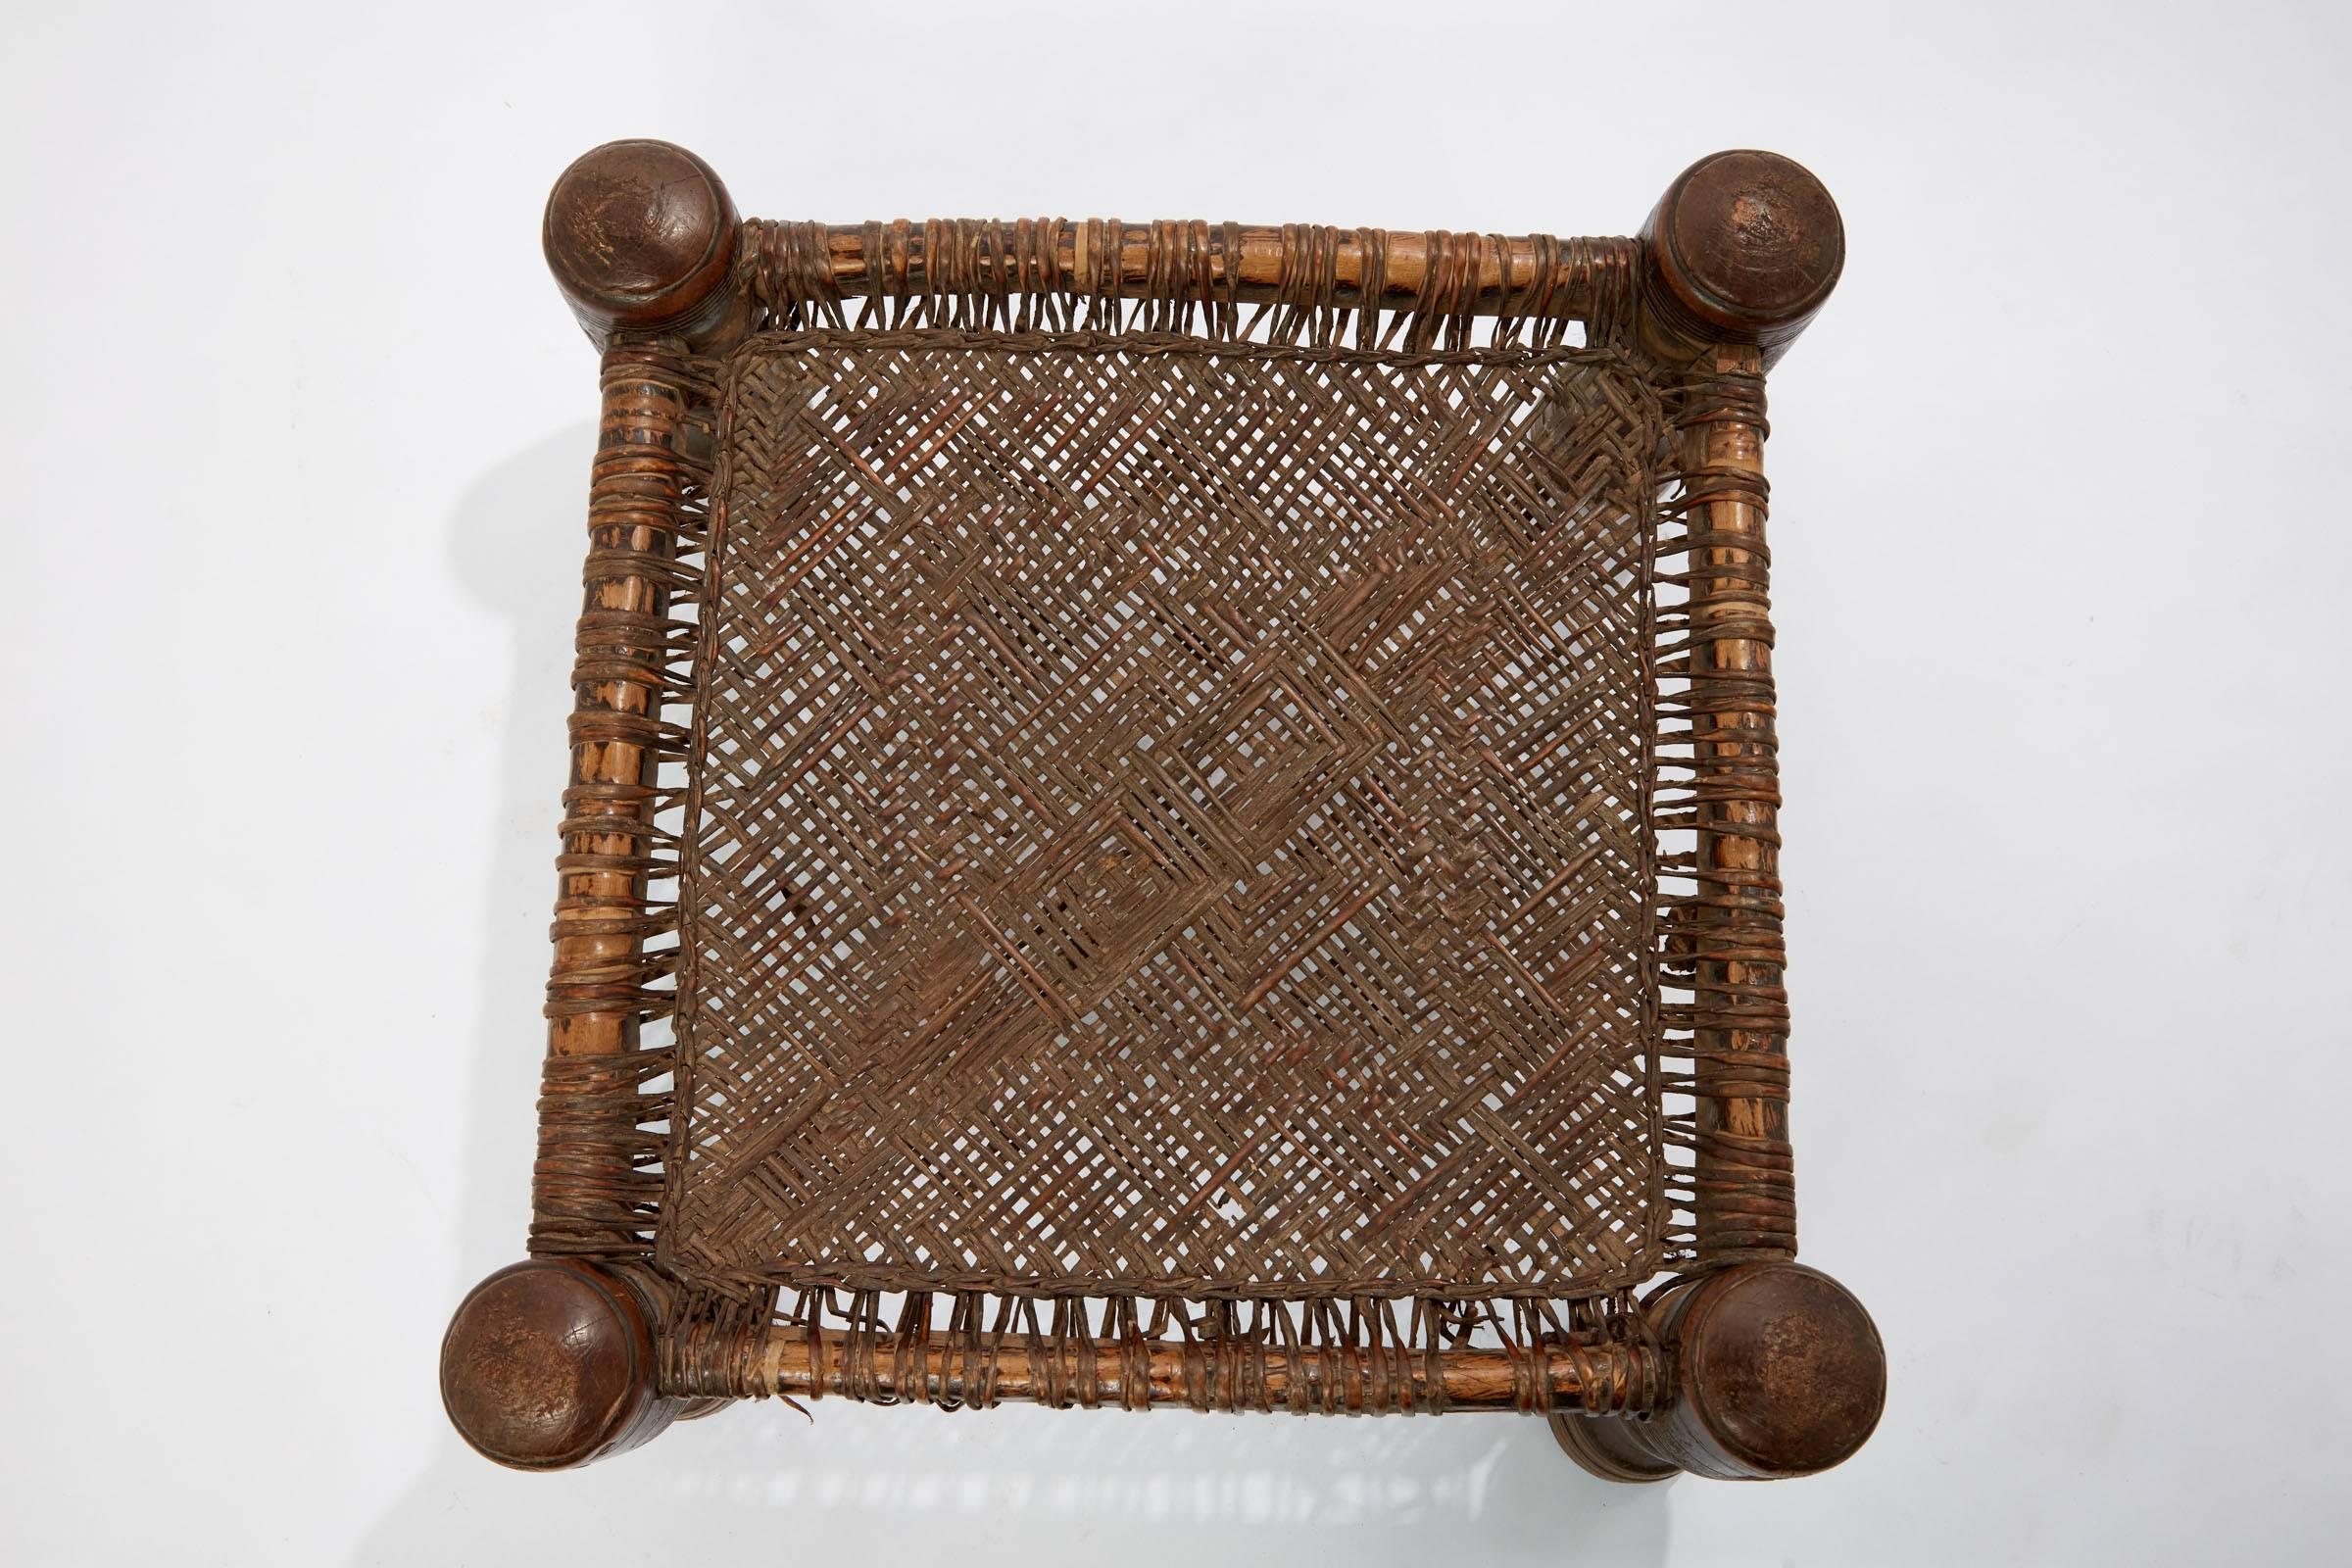 Malian 20th Century Hand Woven Leather Stool from Swat Valley in Pakistan